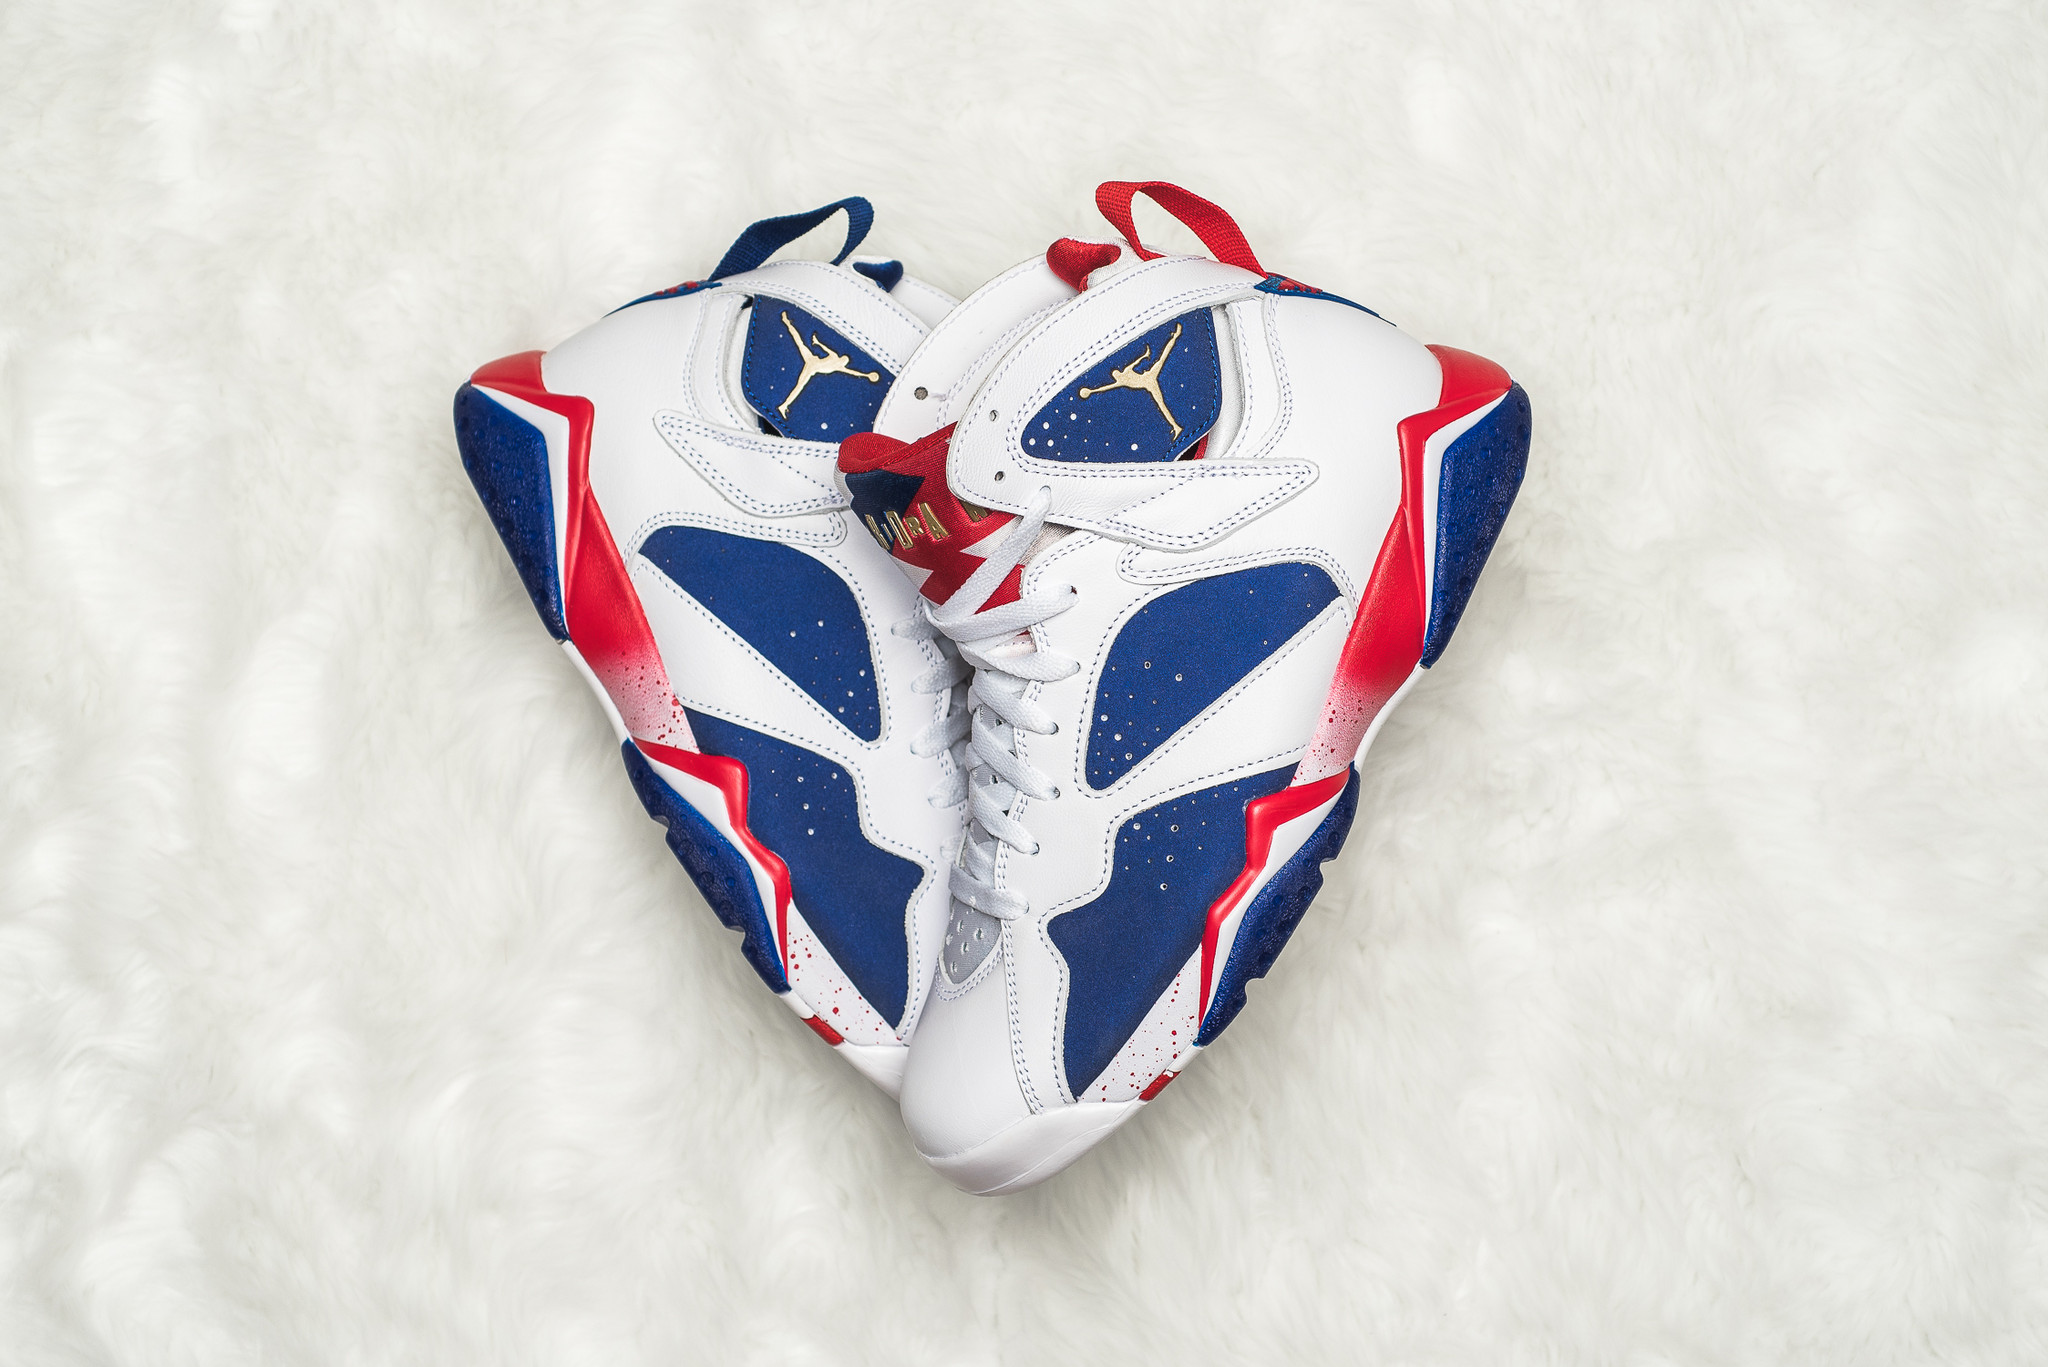 olympic 7 release date